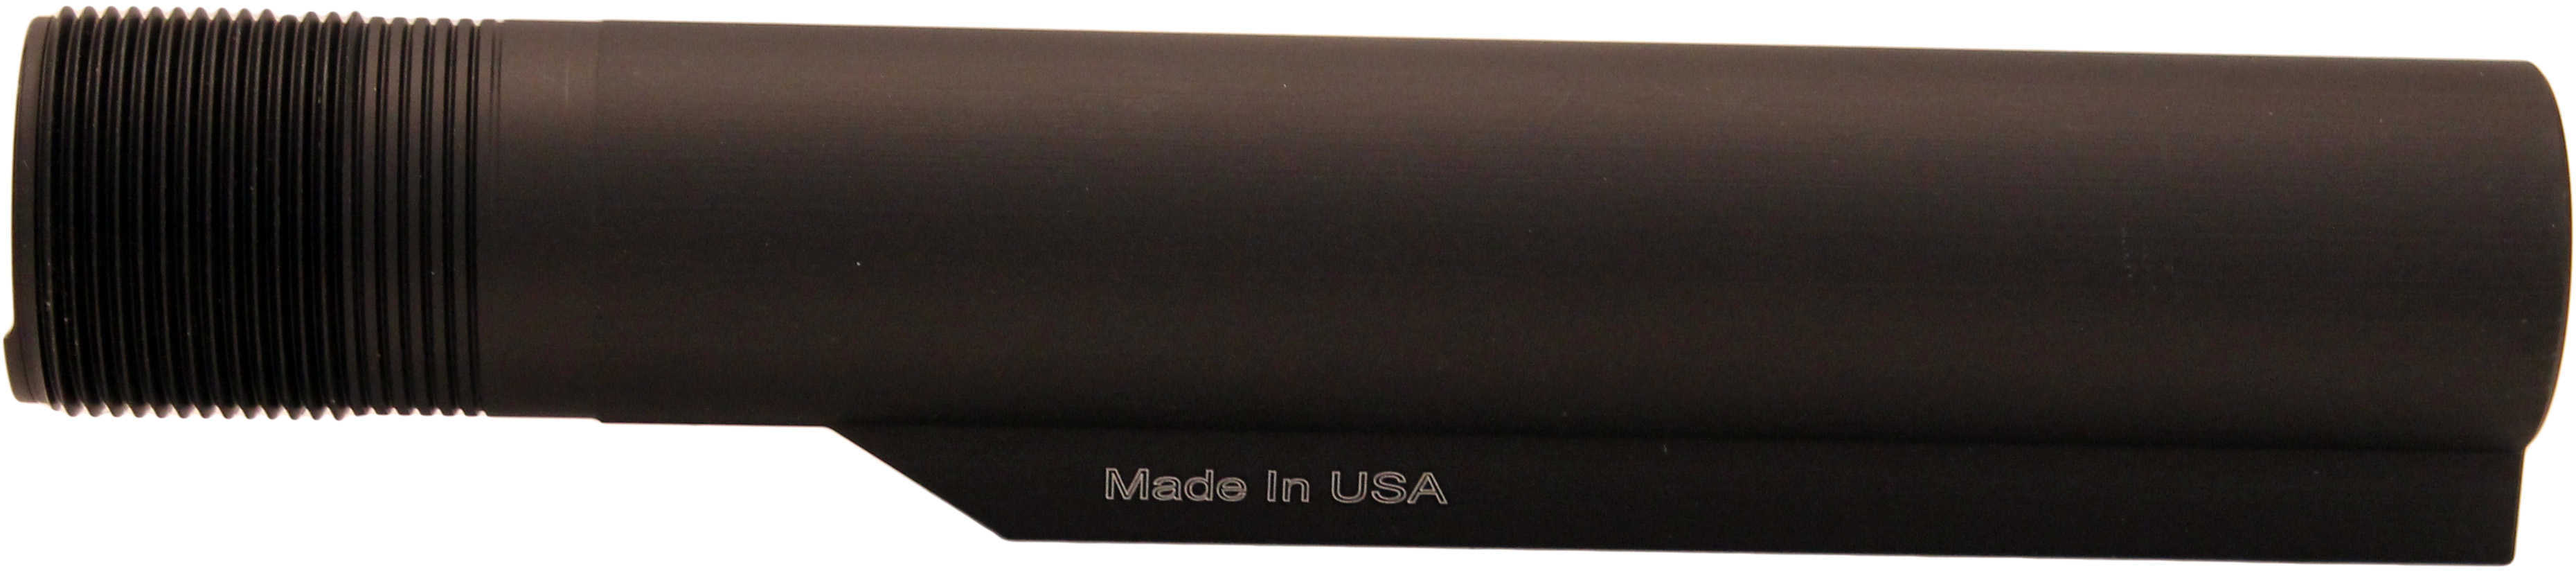 Leapers UTG Pro US Made Mil-Spec 6-Position Receiver Extension Tube